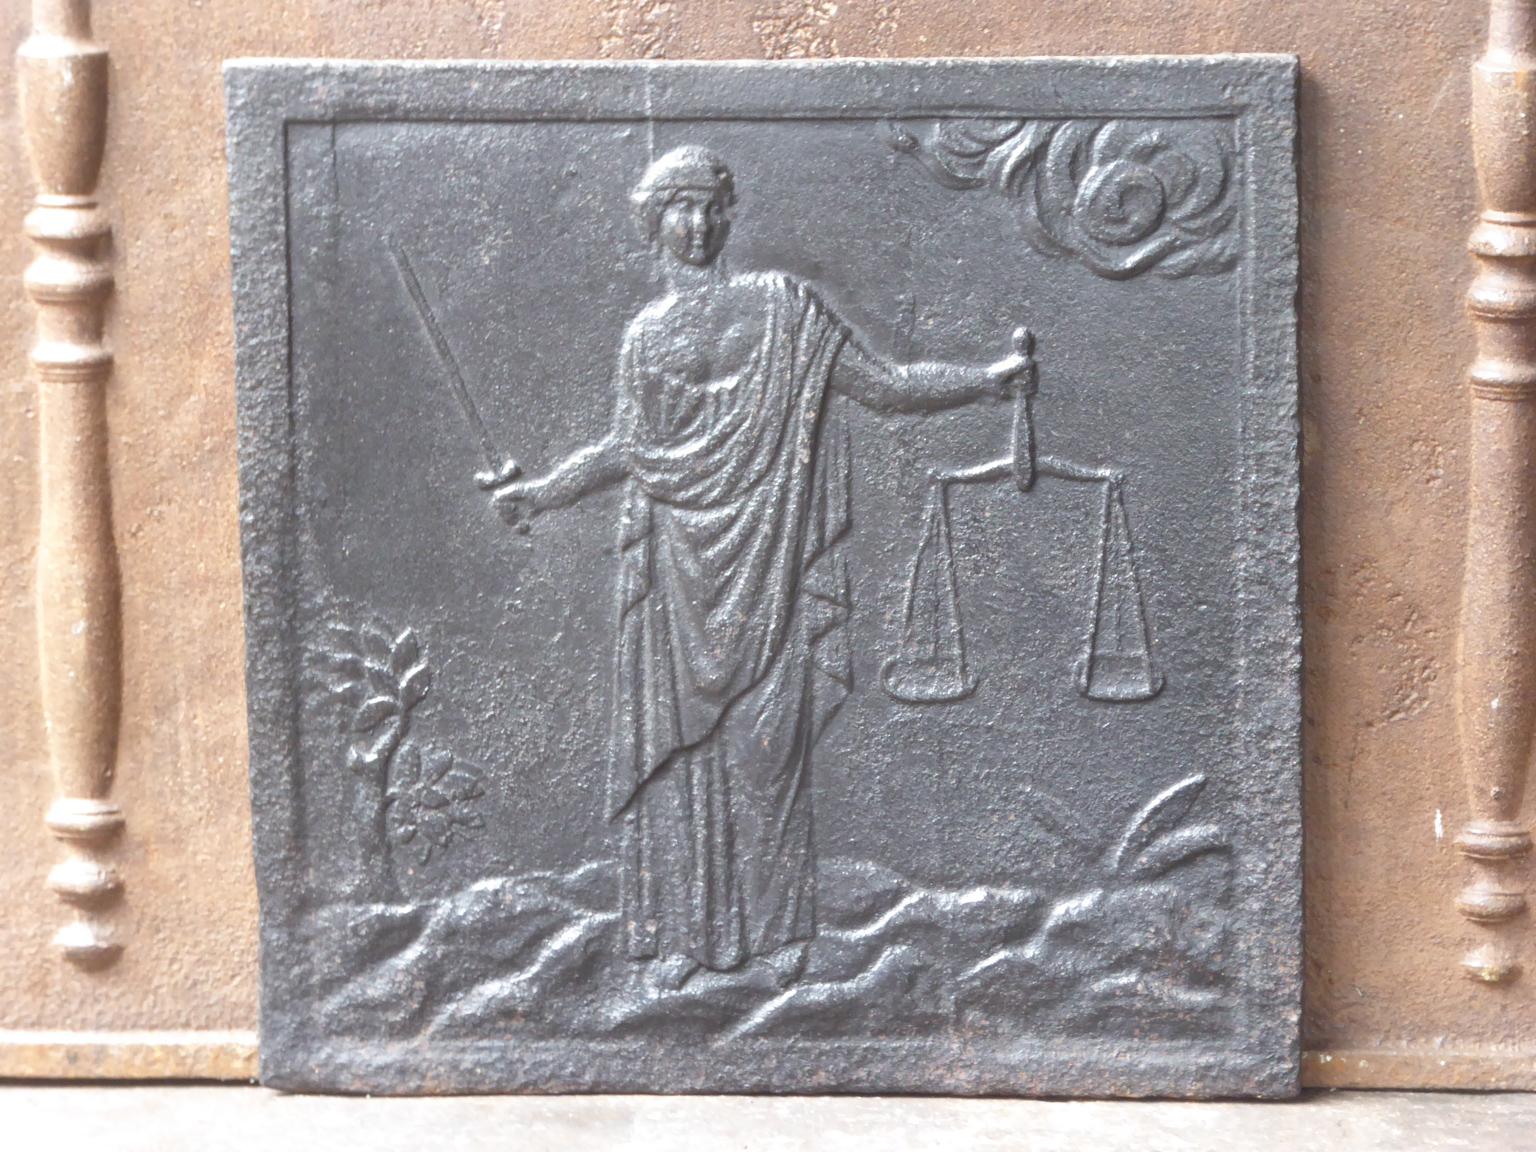 19th century French Napoleon III fireback with the Goddess Justice. The personification of justice balancing the scales of truth and fairness dates back to the Goddess Maat, and later Isis, of ancient Egypt. 

The fireback is made of cast iron and